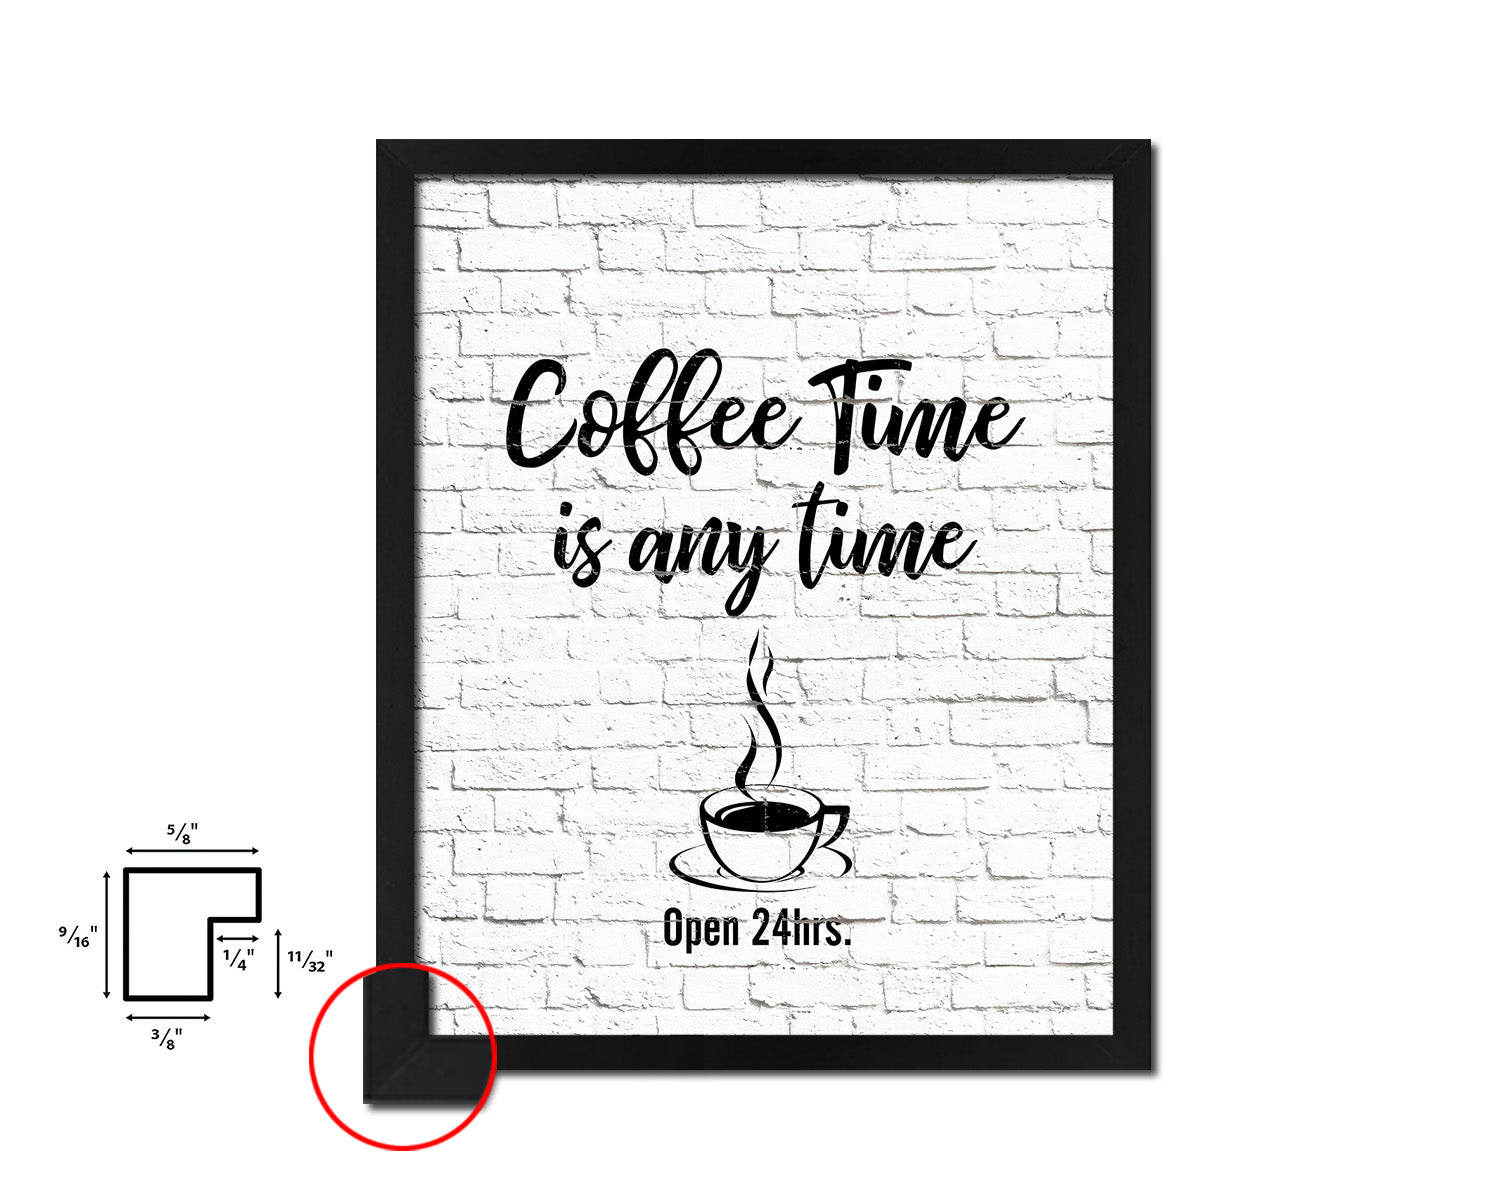 Coffee time is any time Open 24hrs Quote Framed Artwork Print Wall Decor Art Gifts